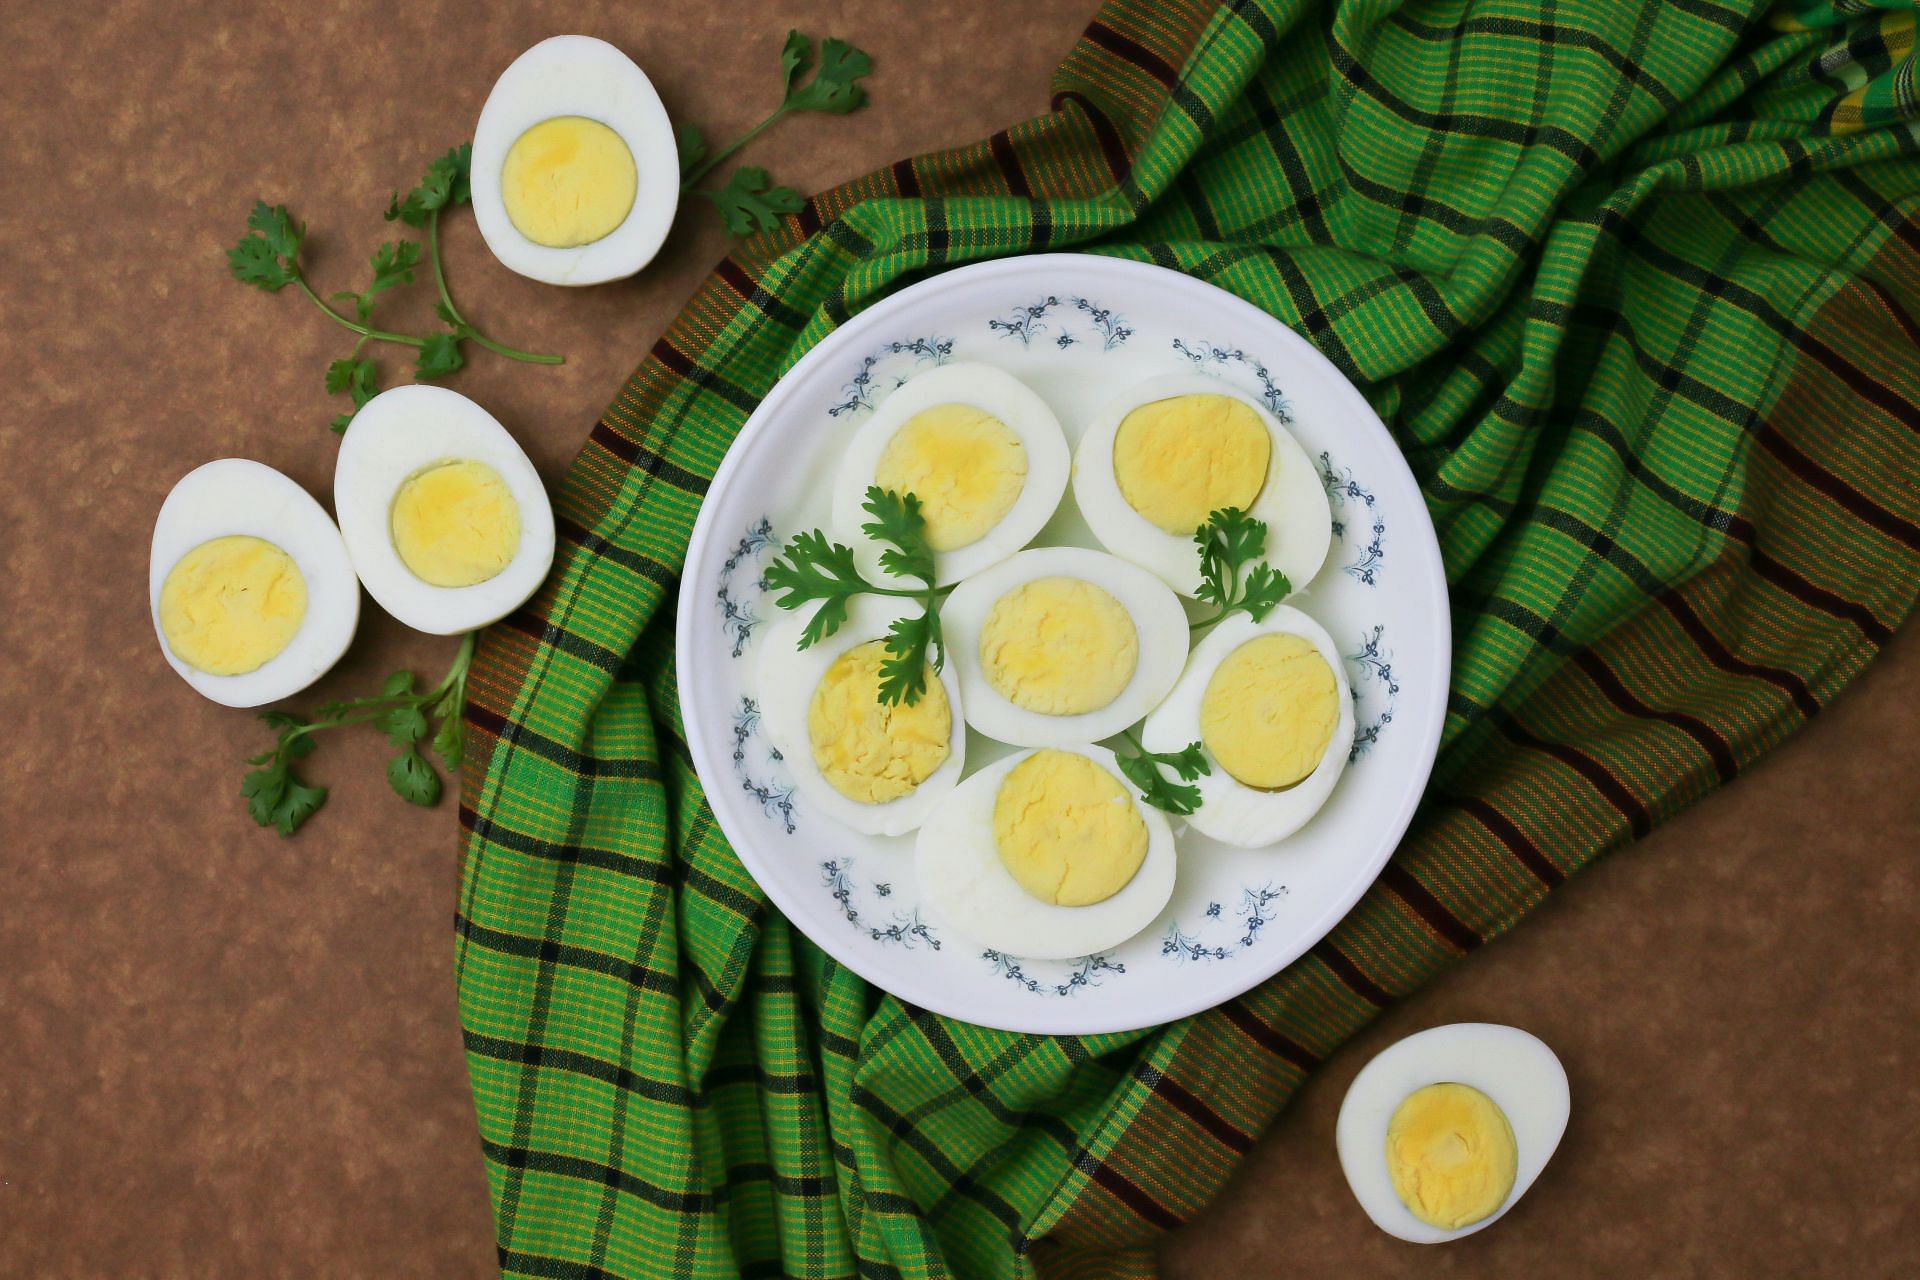 The boiled egg diet claims quick weight loss. (Image via Unsplash/Tamanna Rumee)